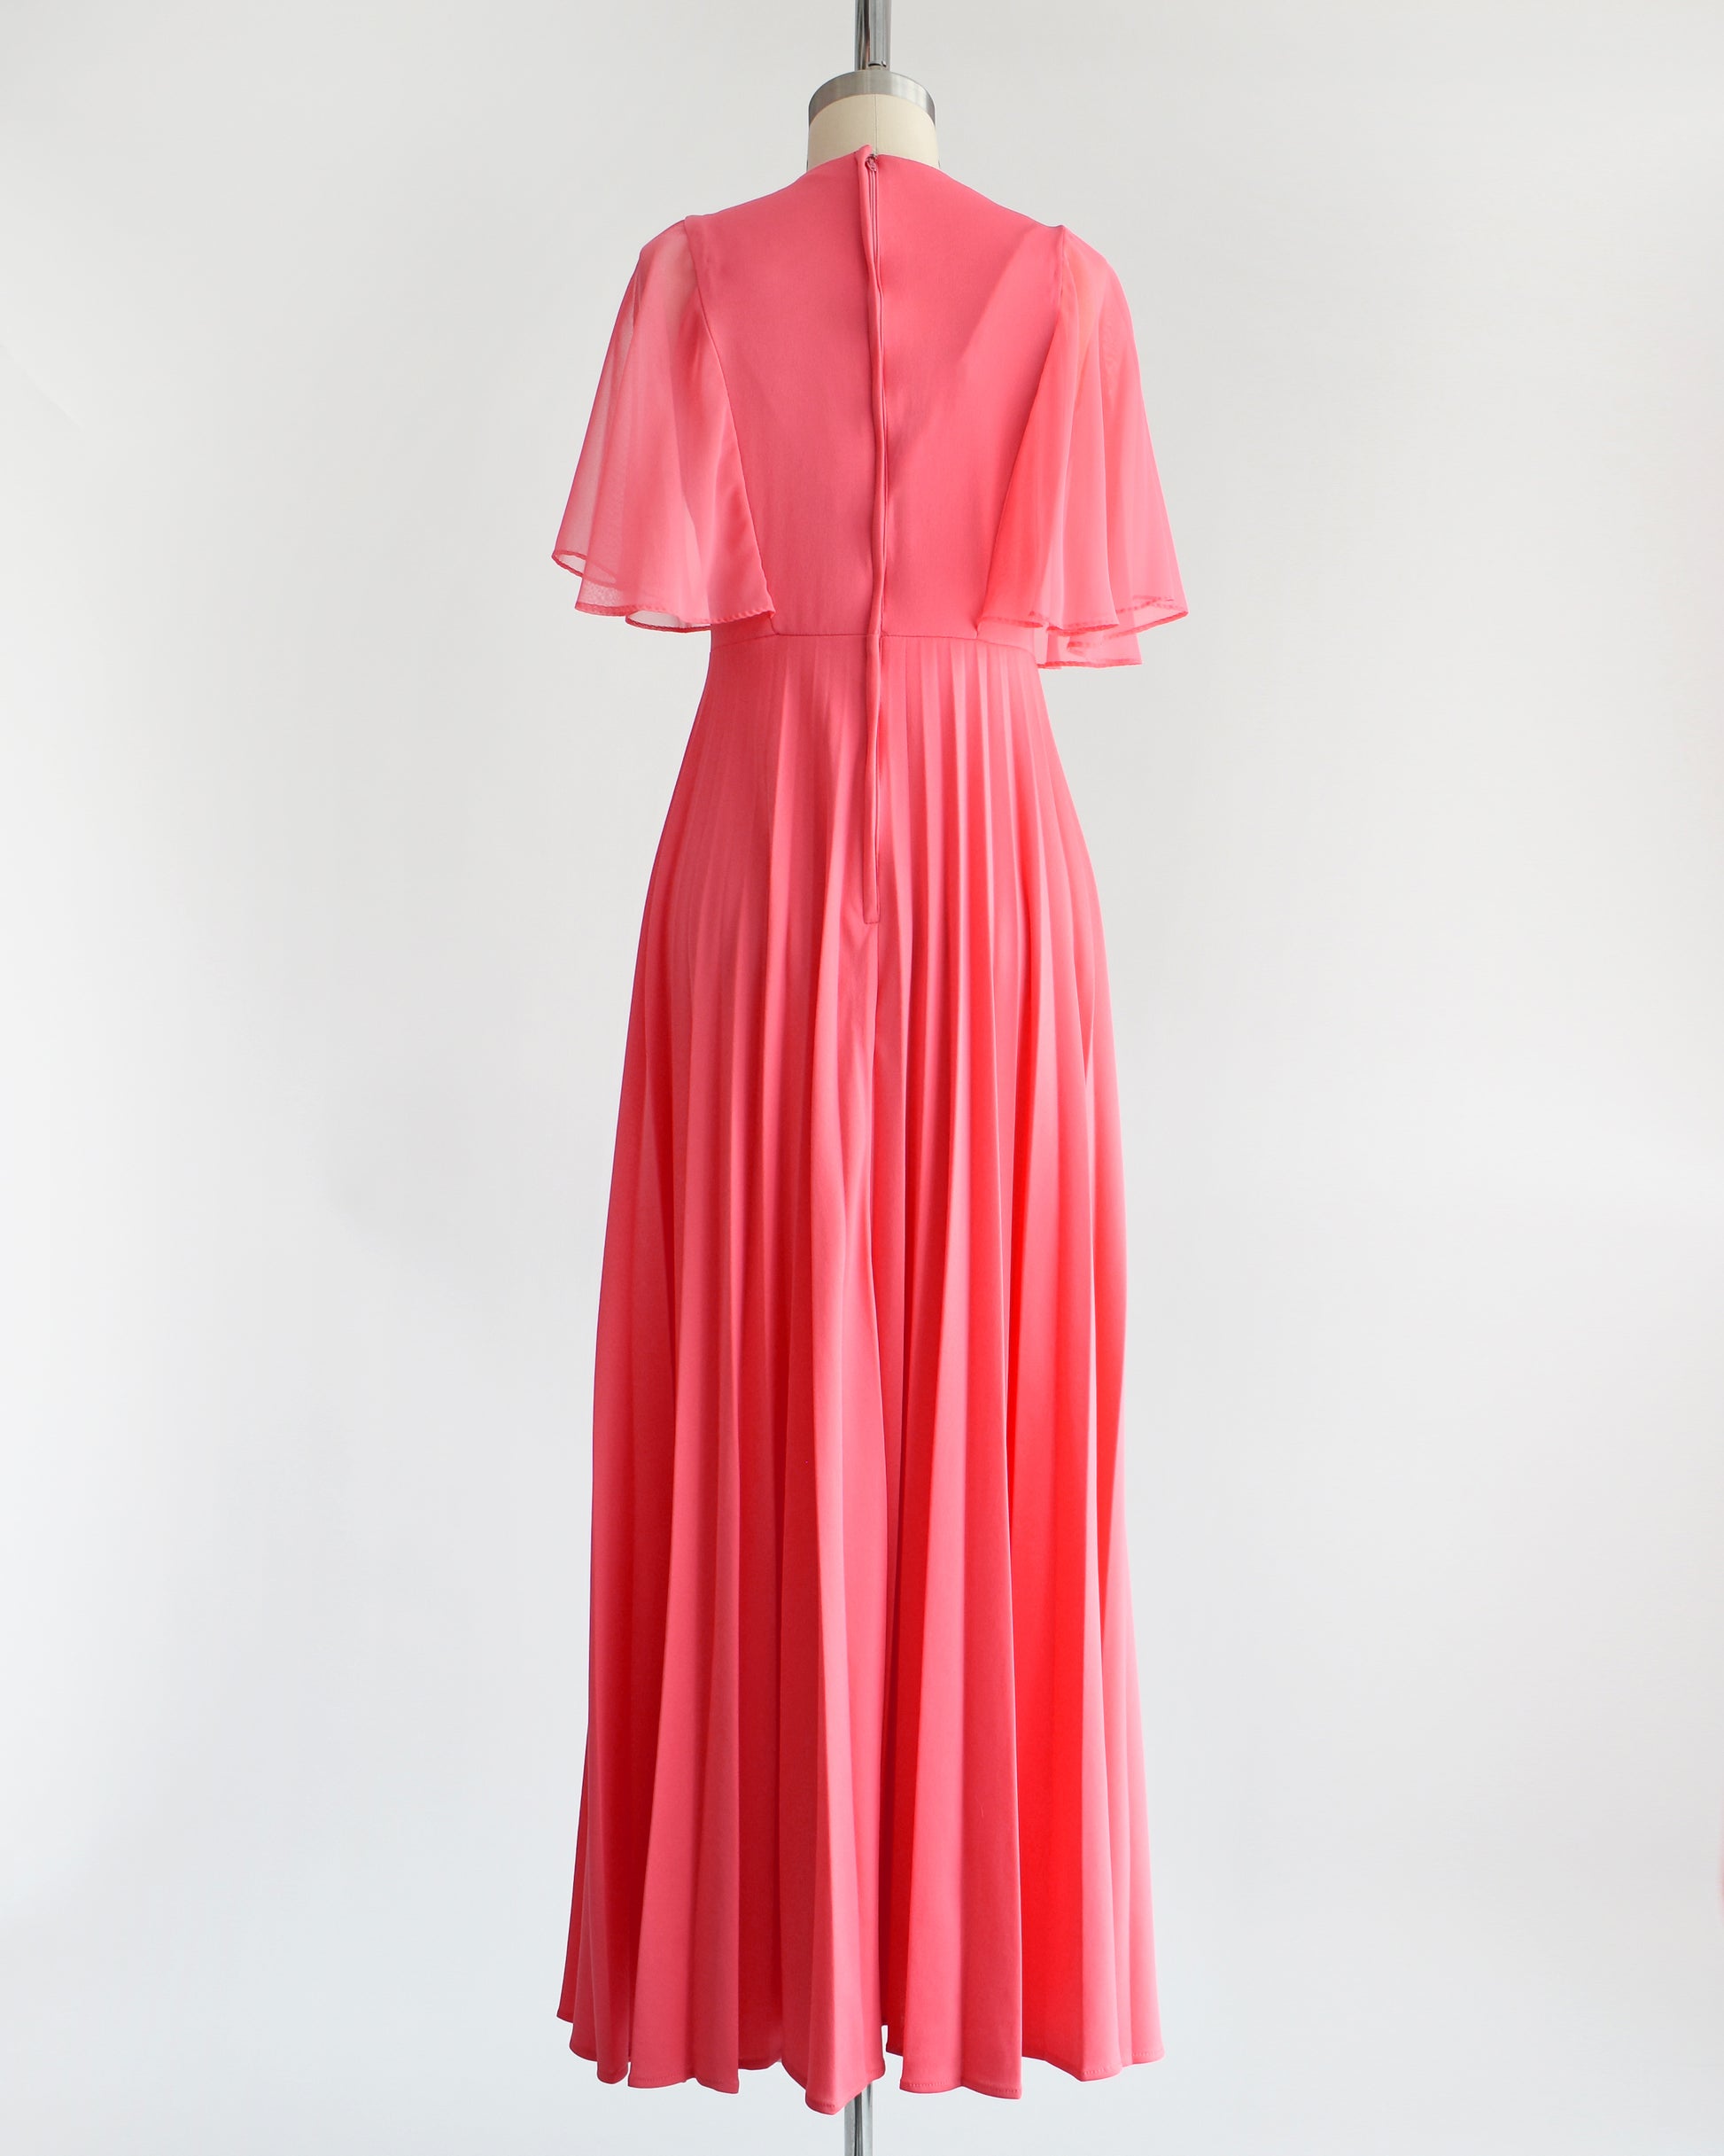 Back view of a vintage 70s coral pink maxi dress that has a faux wrap front with semi-sheer flutter sleeves, empire waist, and a long flowing accordion pleated skirt. Zipper up the back. The dress is on a dress form.